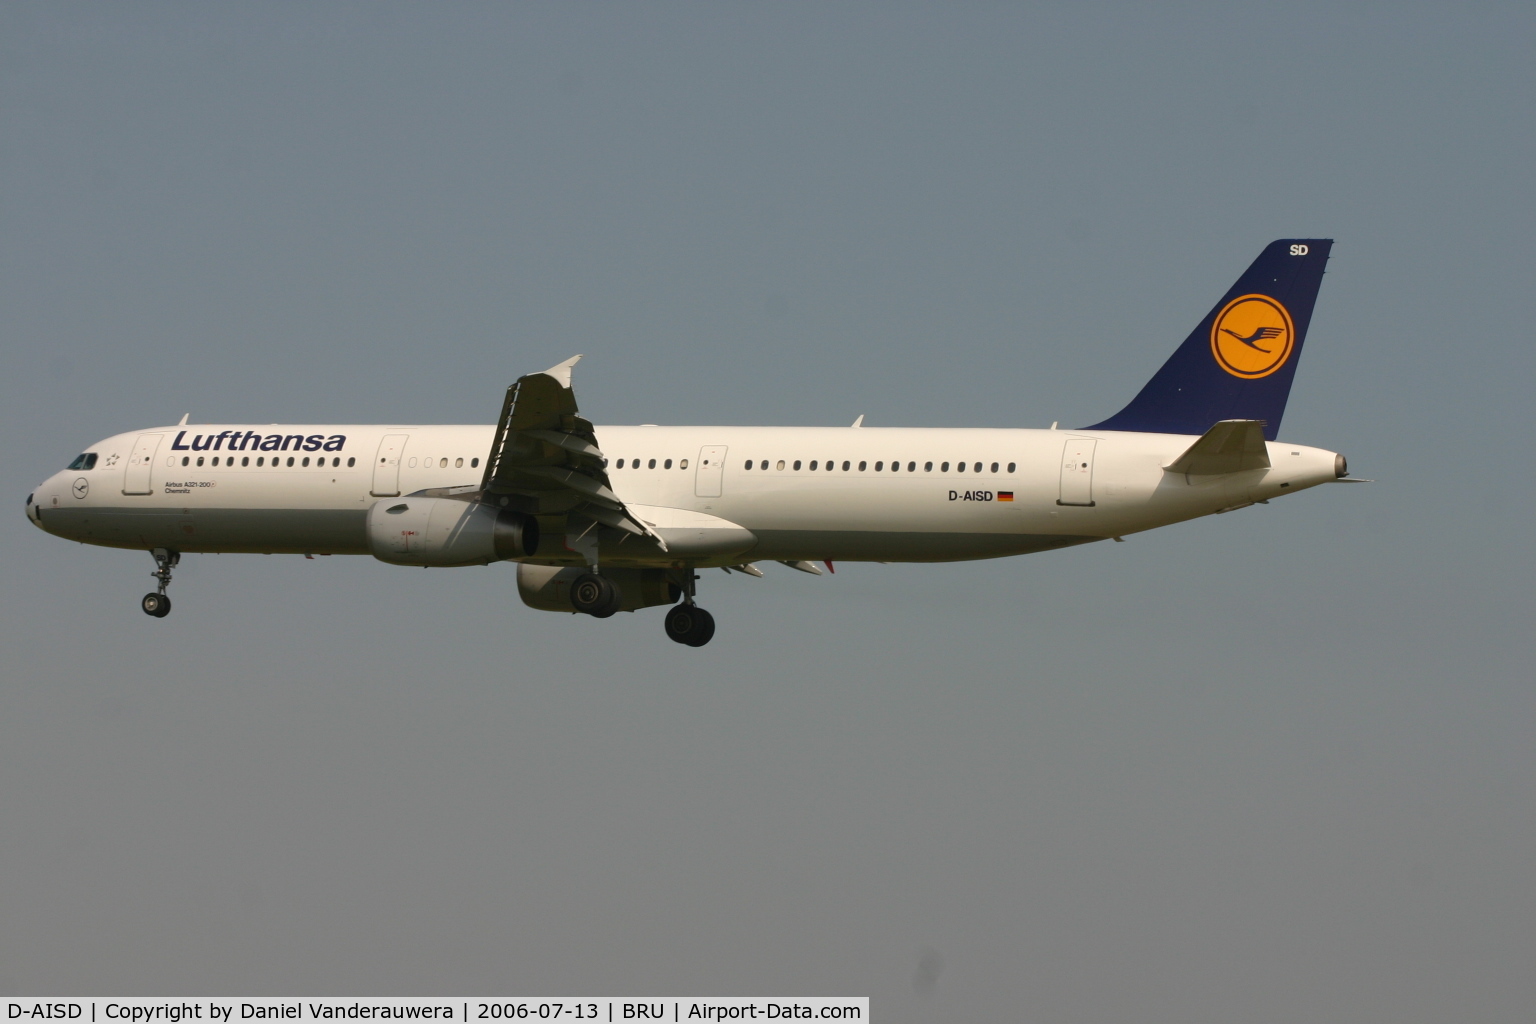 D-AISD, 2000 Airbus A321-231 C/N 1188, CHEMNITZ is about to land on rwy 25L